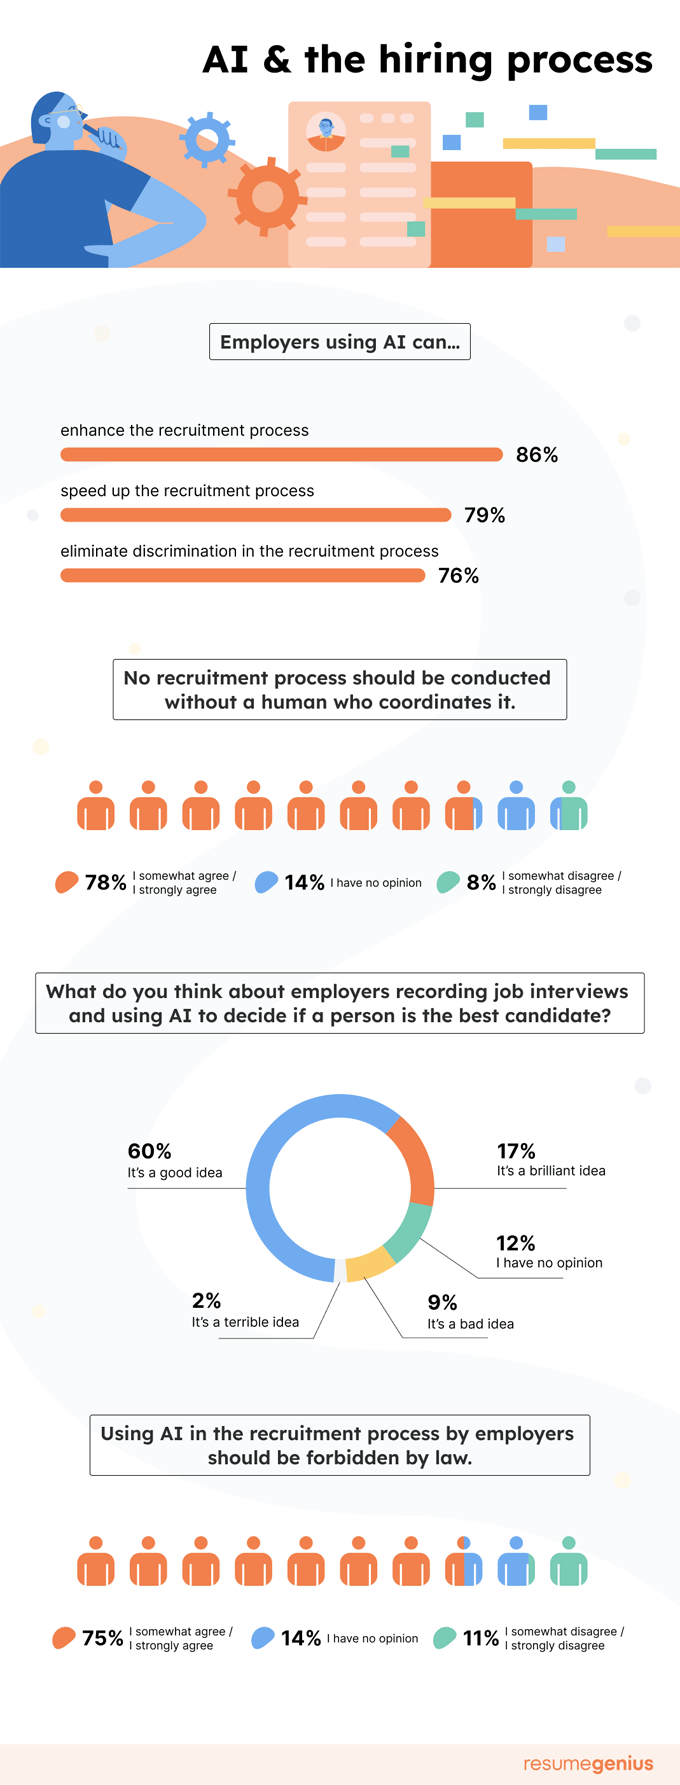 A graphic showing people's opinions on using AI during the hiring process.